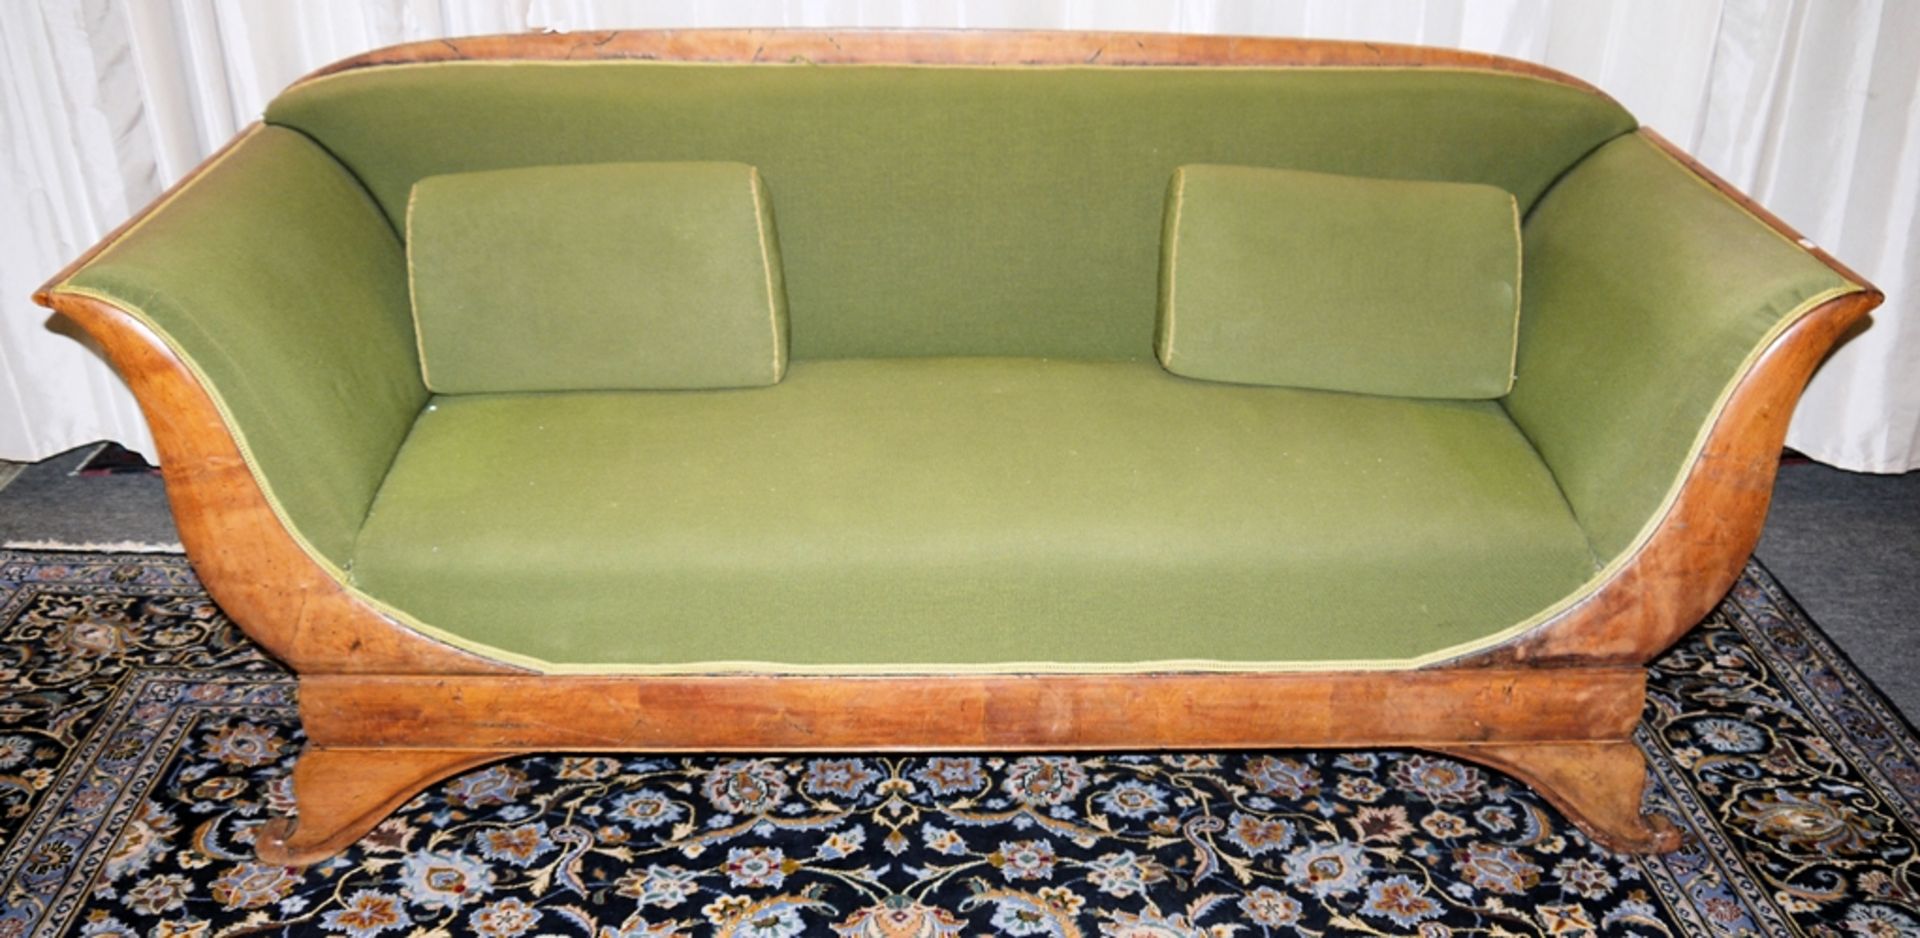 Classical Biedermeier seating set consisting of a sofa, table and chairs, 1st half of the 19th cent - Image 3 of 3